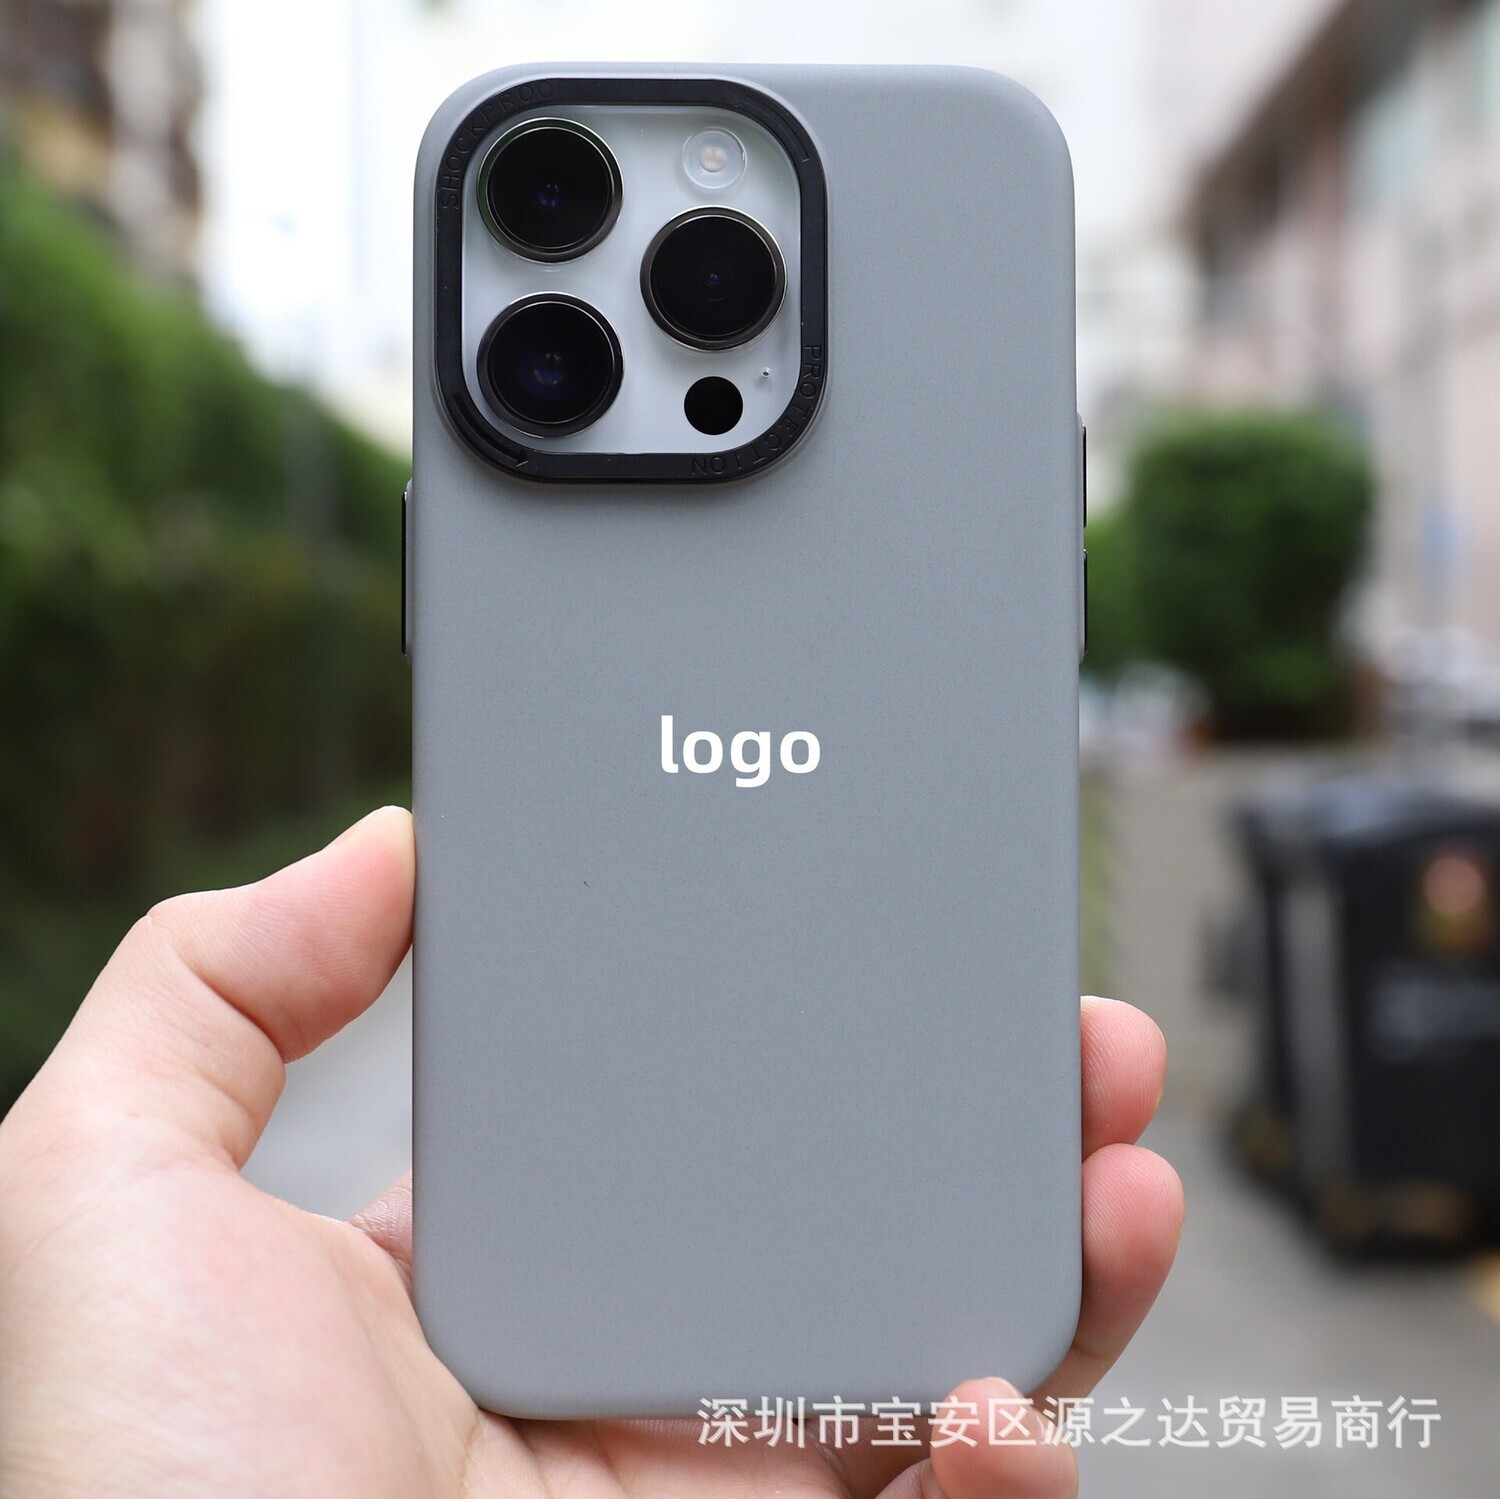 PC matte solid color with metal lens ring anti-fall iPhone15 Case, Color: Titanium gray with logo, Model: 15promax